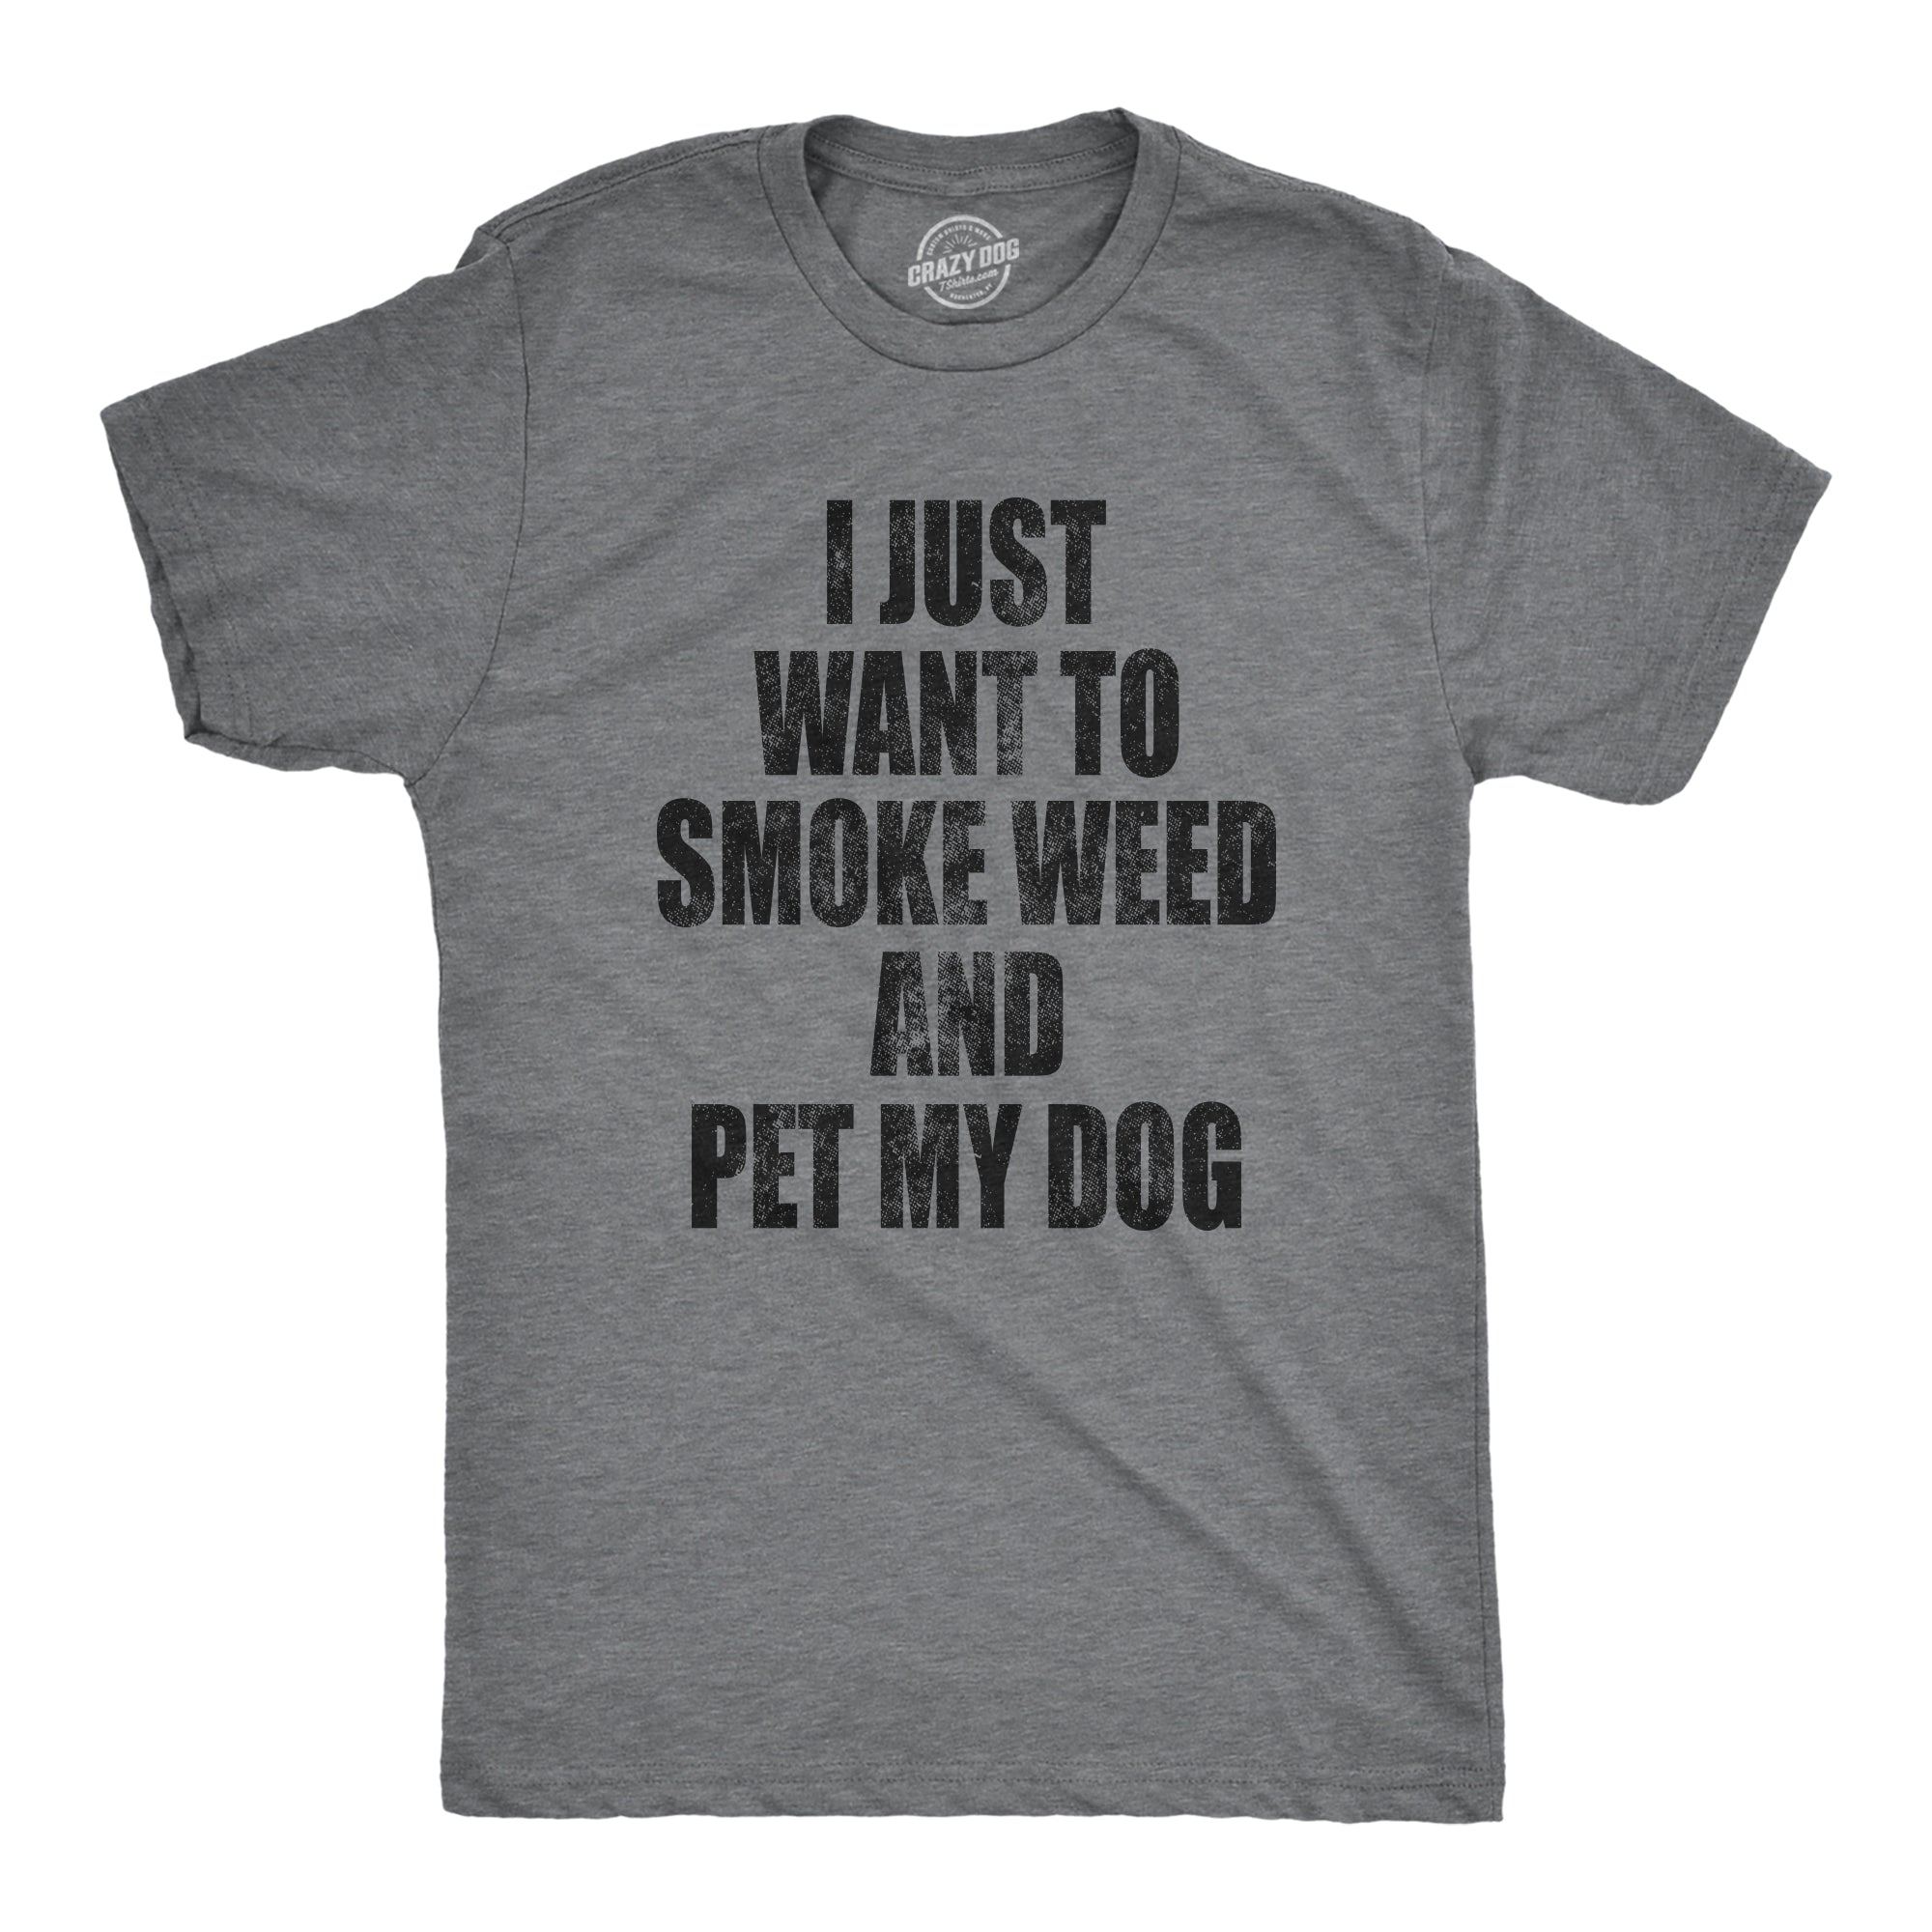 Funny Dark Heather Grey I Just Want To Smoke Weed And Pet My Dog Mens T Shirt Nerdy 420 Dog Tee